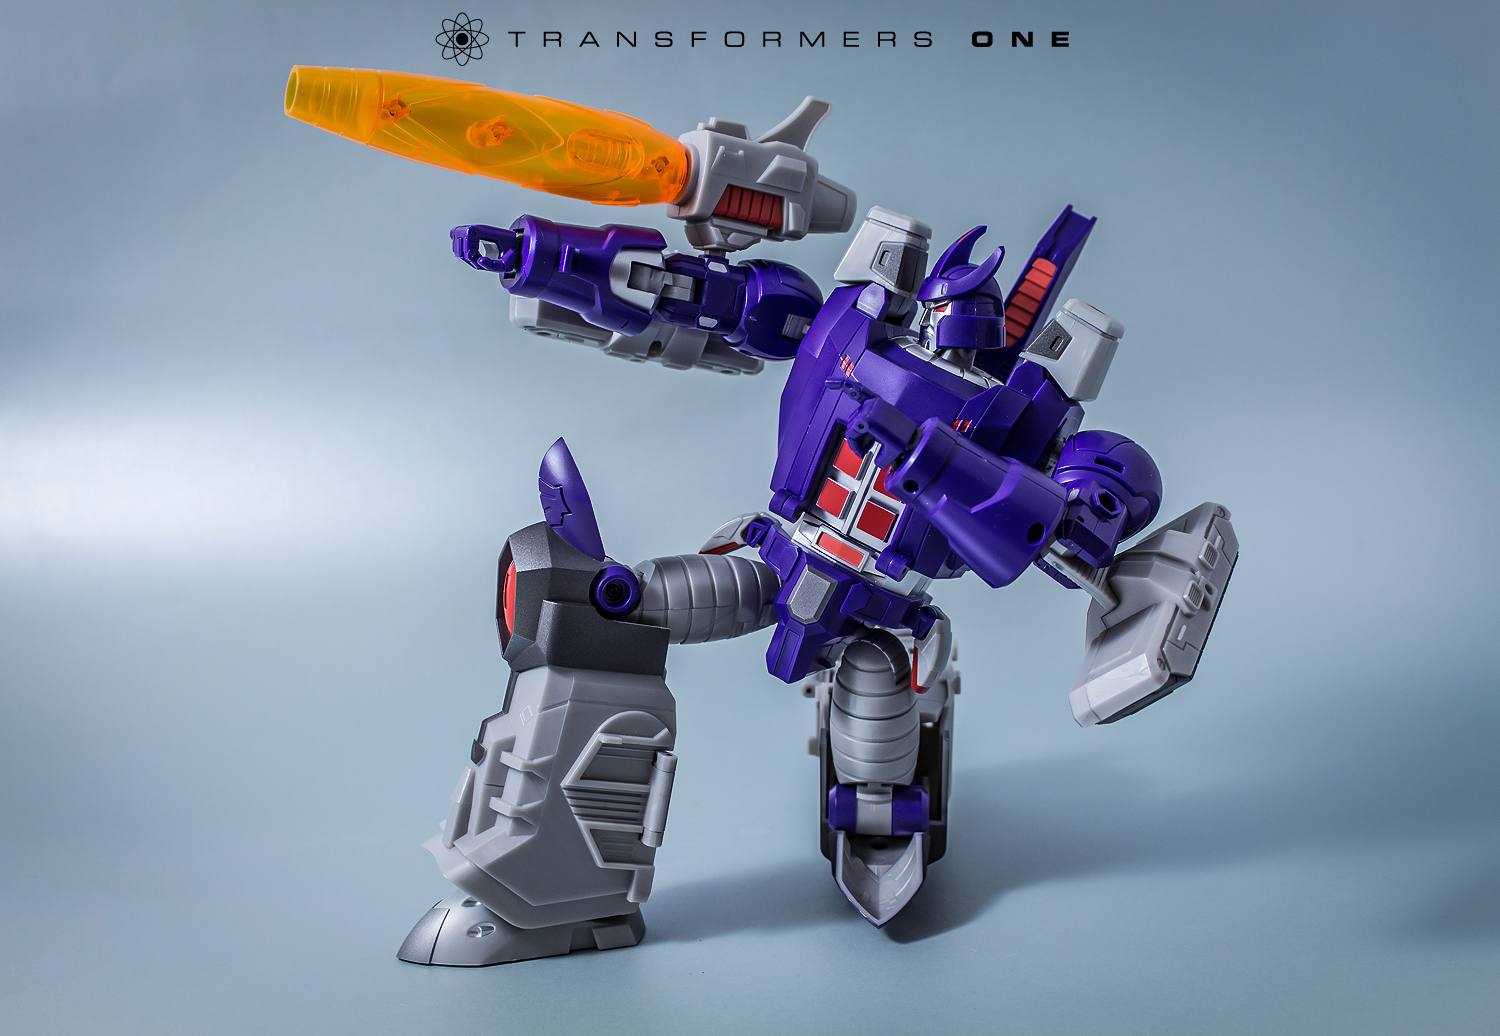 Transformers toy OpenPlay Big Cannon Galvatron Loose Version no Box in stock